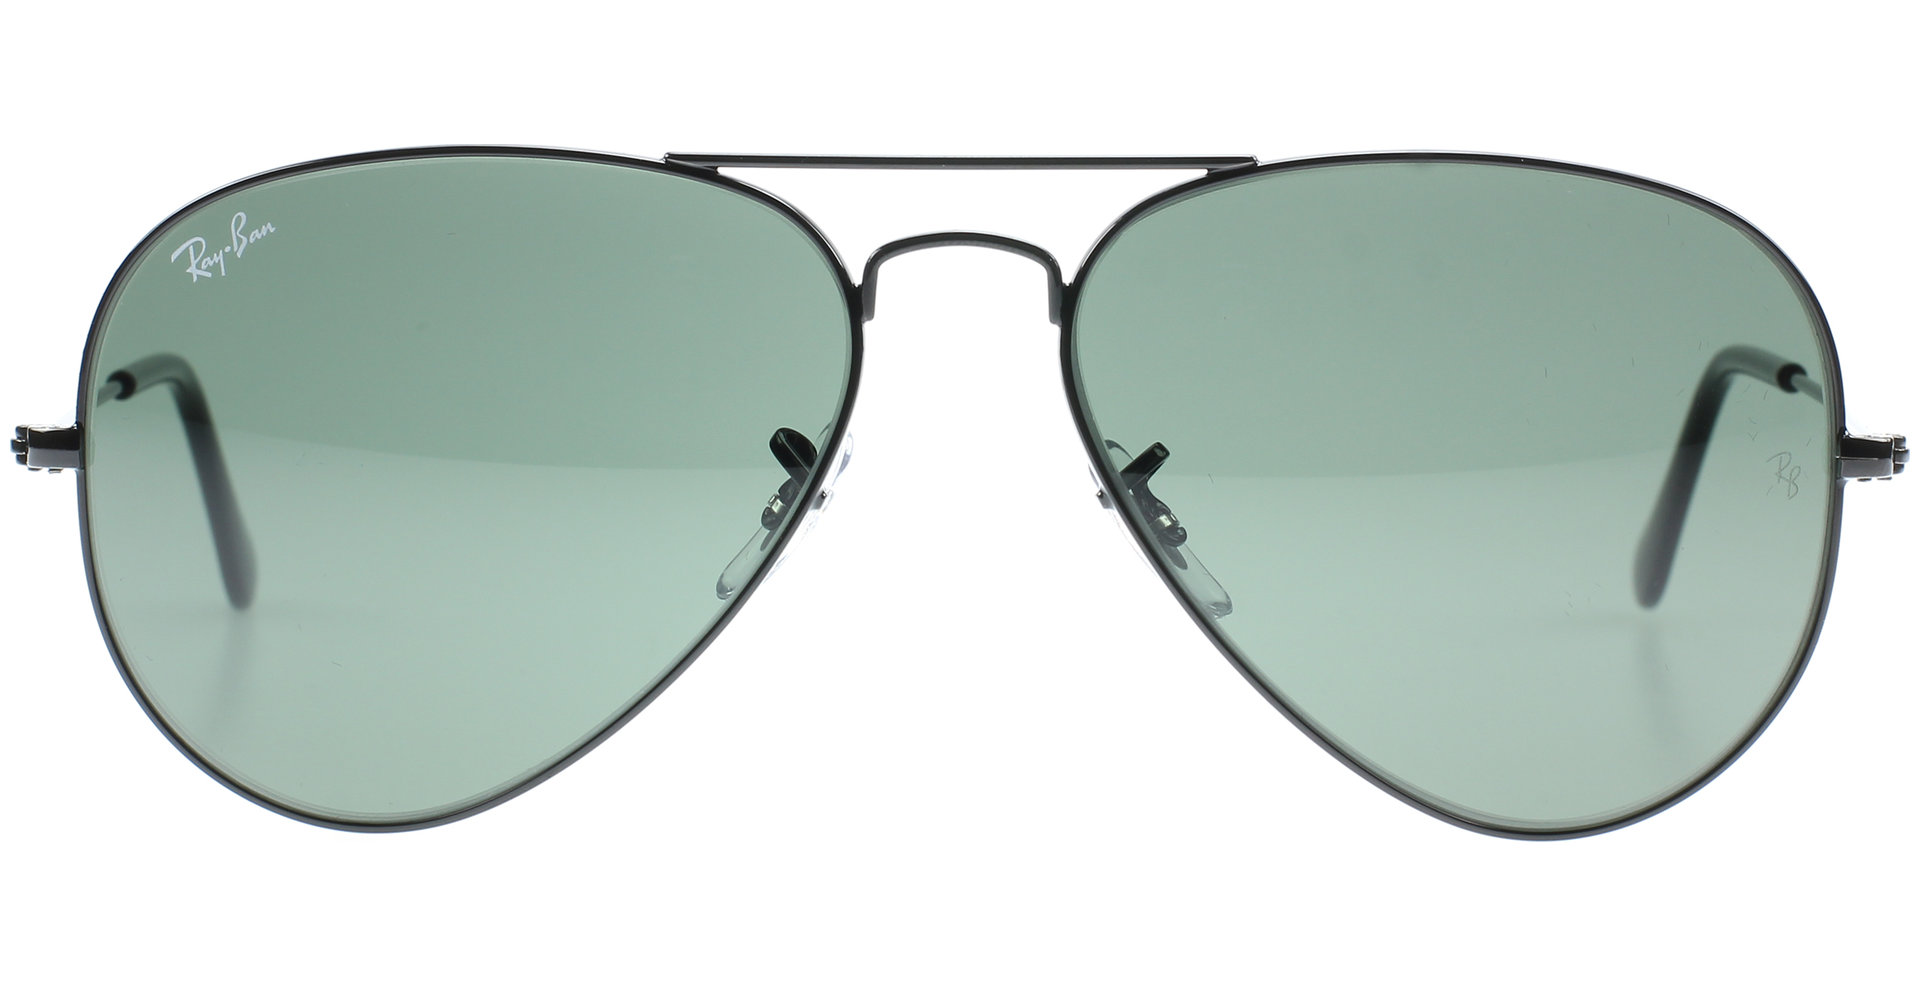 ray ban authorized dealers near me